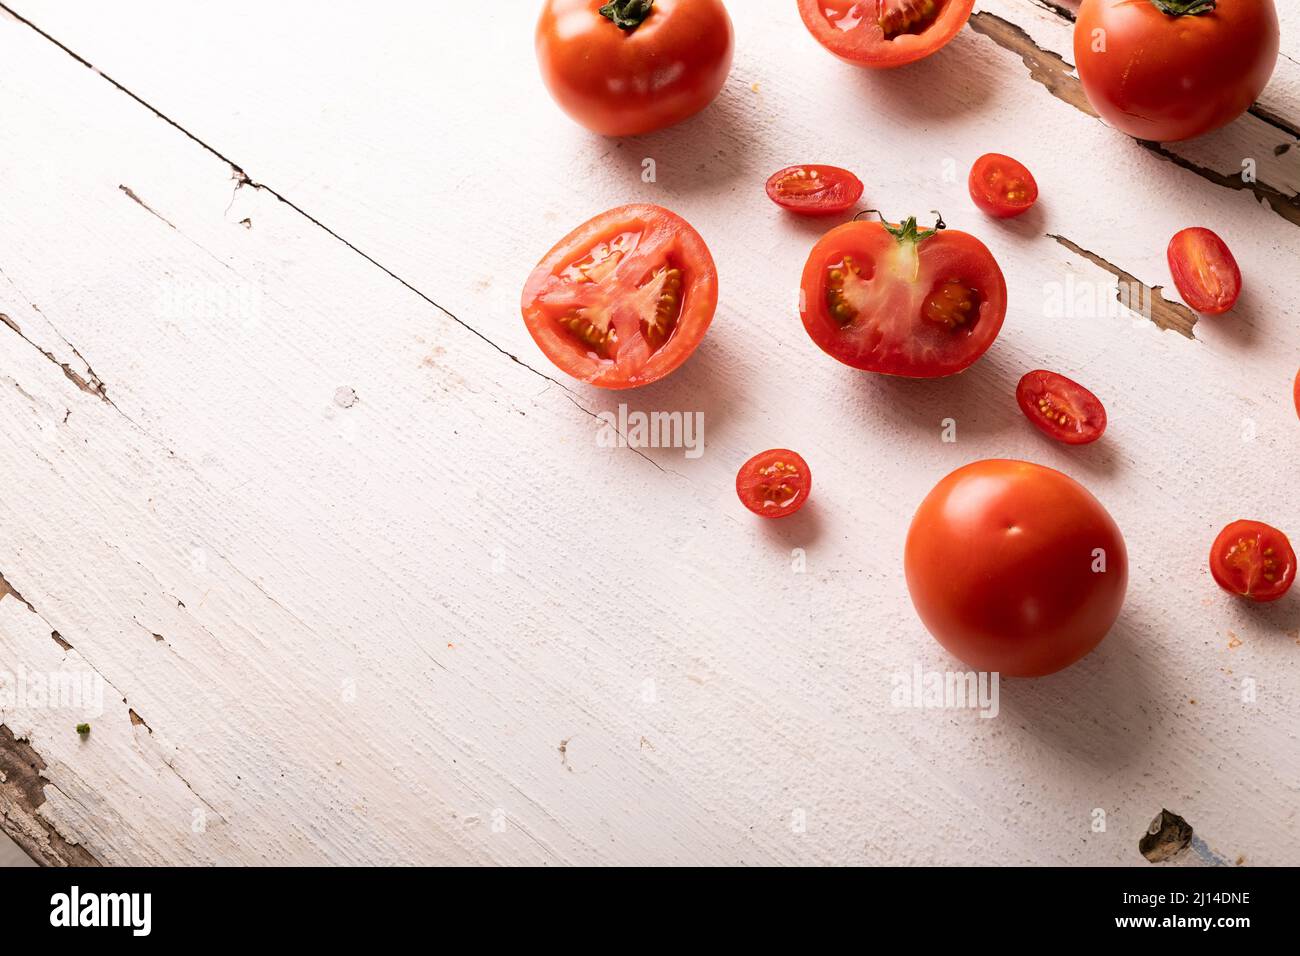 Overhead view of fresh red tomato variations on white wooden table Stock Photo